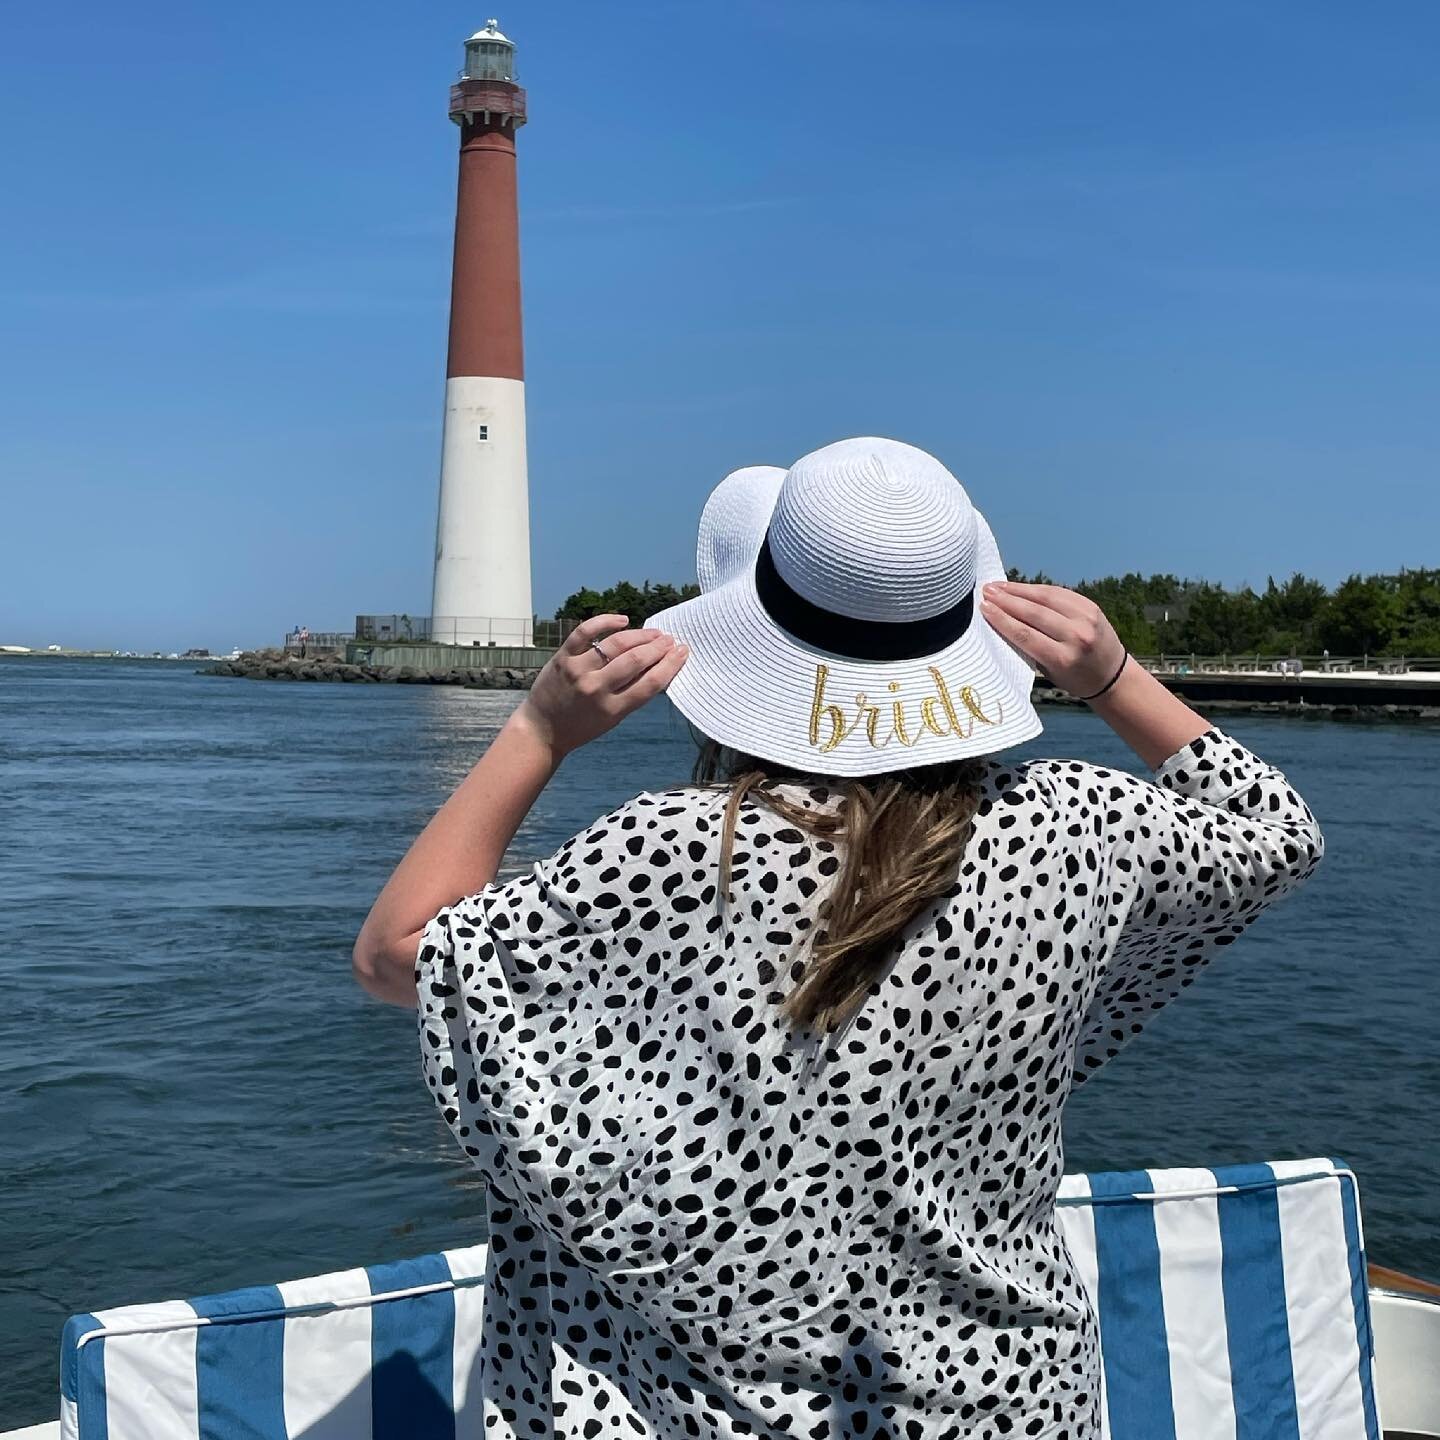 BBBB 
&ldquo;Barnegat Bay 
Bachelorette Boat&rdquo;

Grab your crew and some drinks and snacks and come join us for a day or evening out in Barnegat Light. 

#captaincruise #byob #haveabayday #swimming #bachelorettenj #bachelorettelbi #lbiwedding #nj